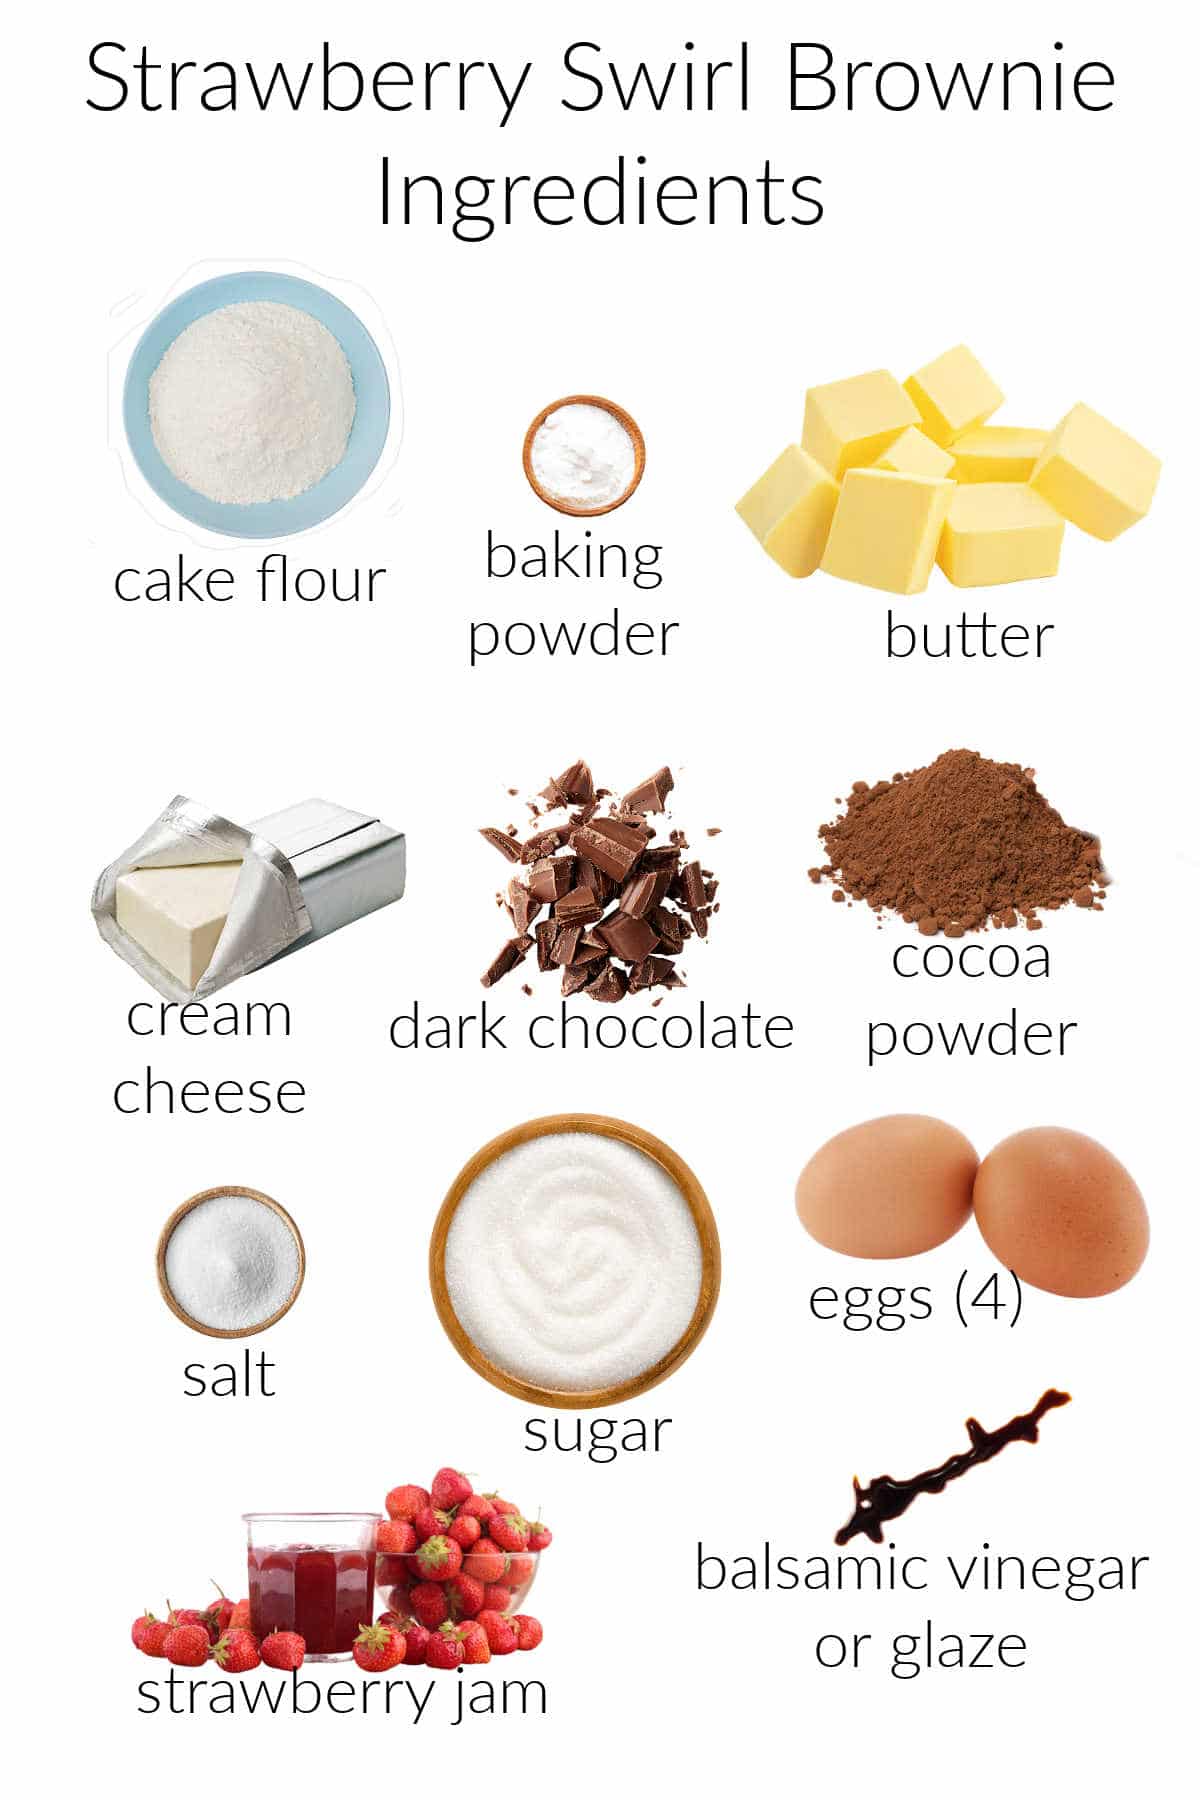 A collage of pictures of ingredients for making strawberry swirl brownies.